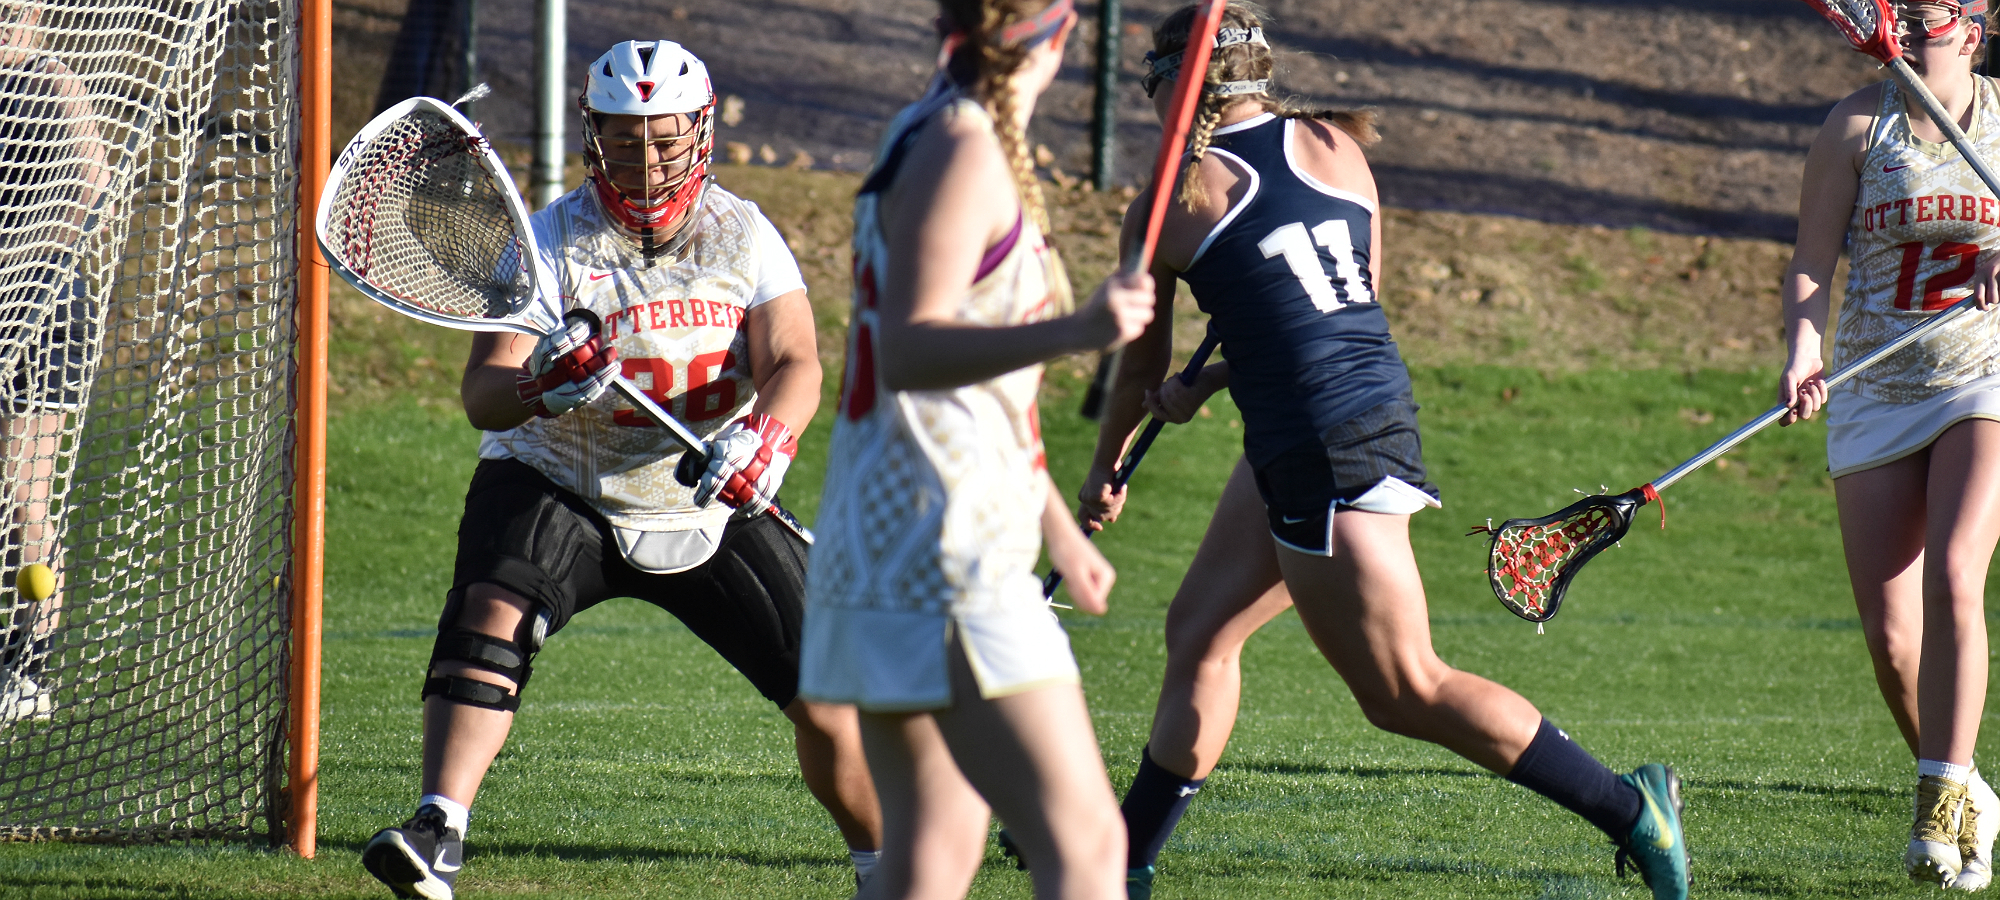 Leite led the Dallas offense with four goals, and eclipsed 100 career points in Friday's match.